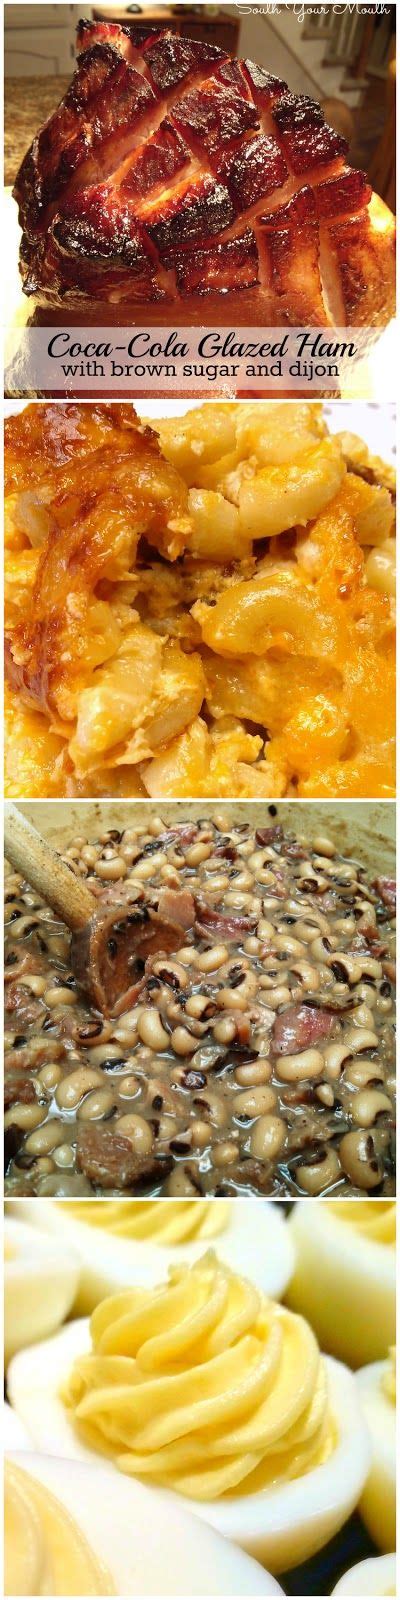 In the case of a southerner, foods like roasted turkey, collard greens, mashed potatoes, macaroni and cheese, potato salad, corn bread dressing, cranberry. Southern Christmas Dinner Recipes | South Your Mouth | Bloglovin'